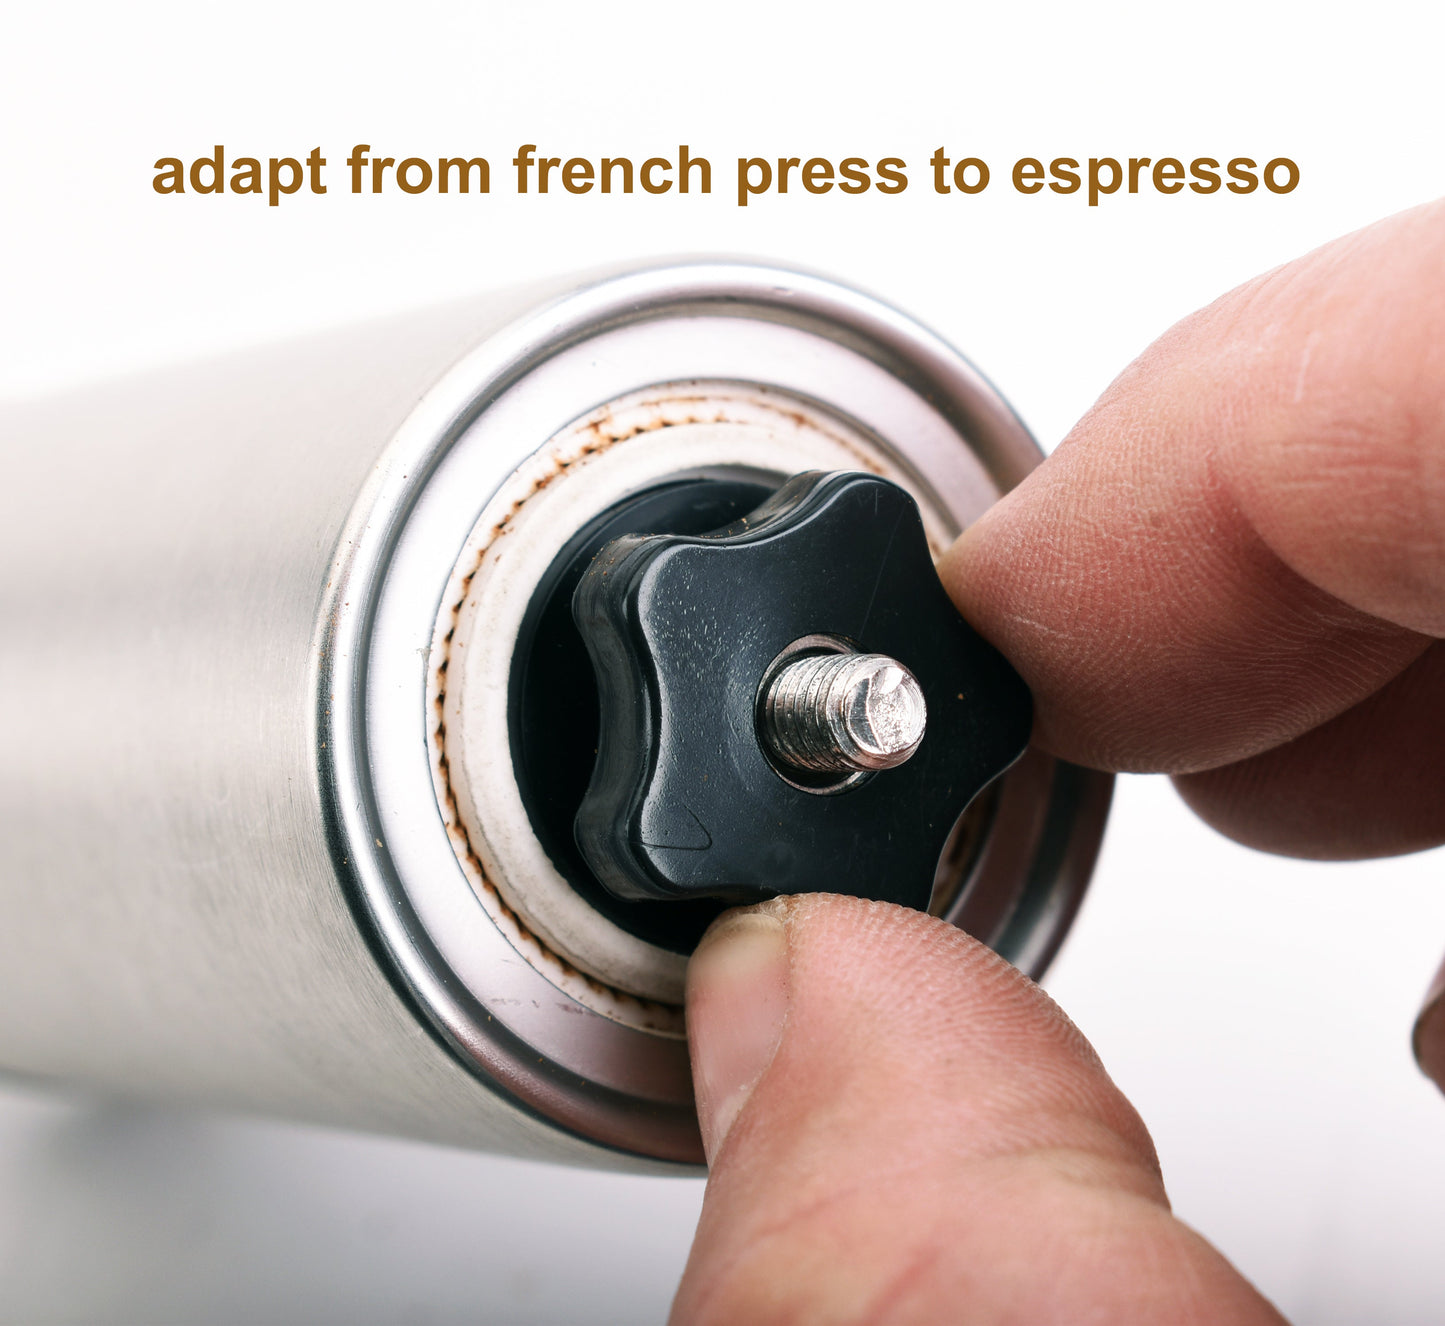 coffee hand grinder for espresso – adapt from french press to espresso